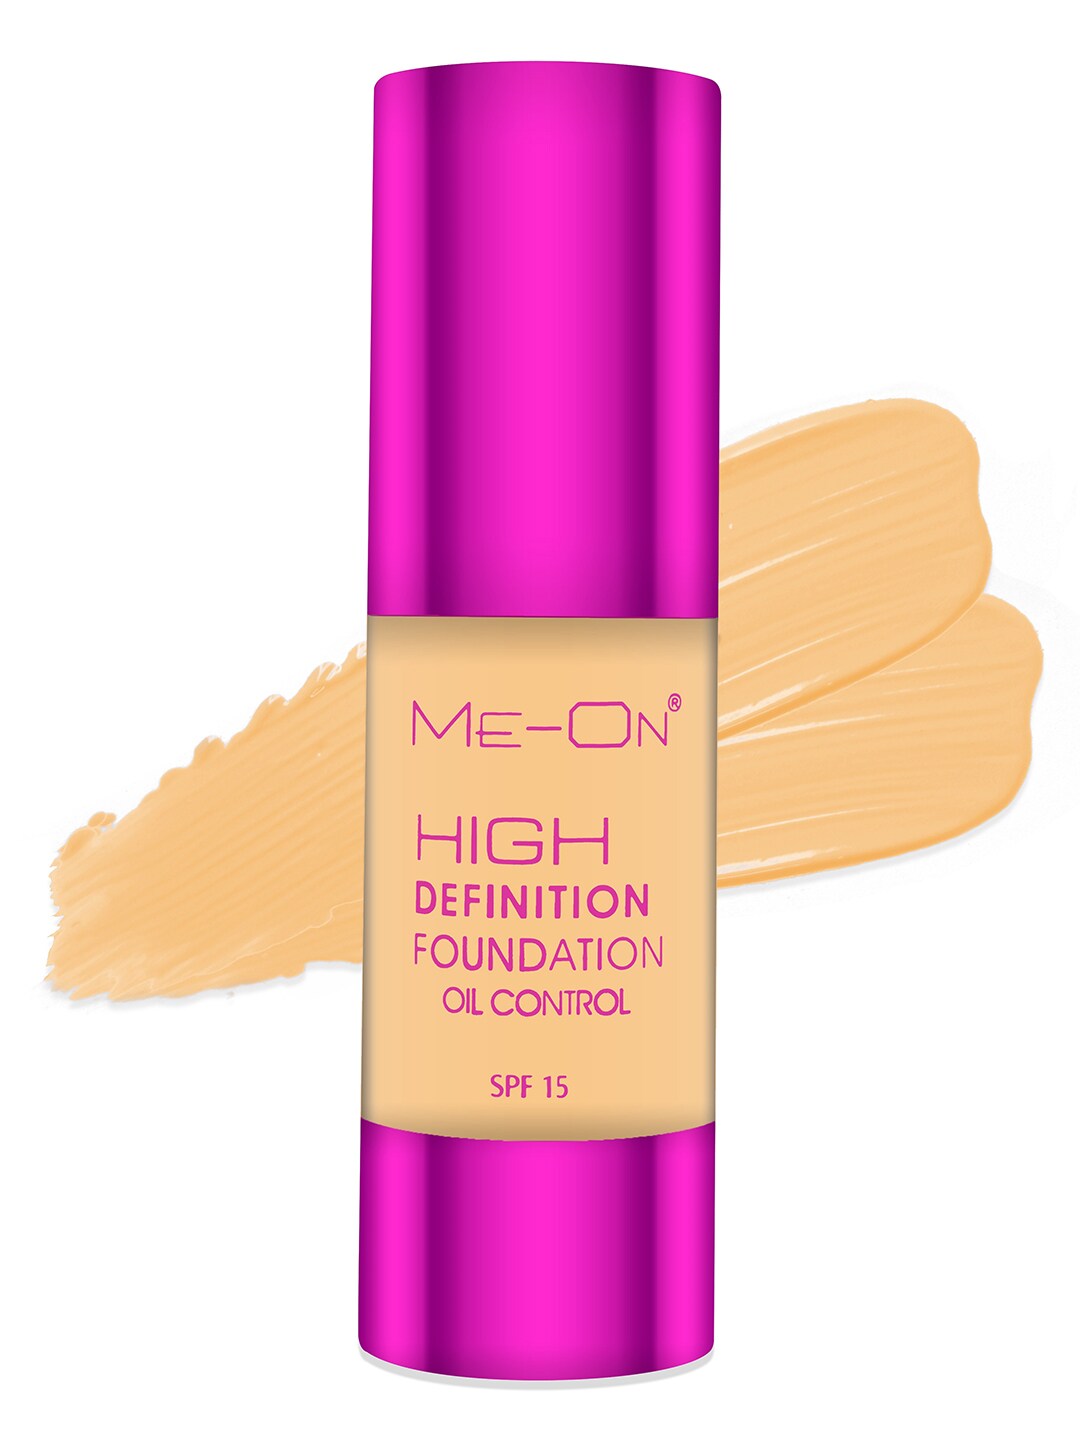 ME-ON High Definition Oil Control Foundation with SPF15 35ml - Shade 02 Price in India